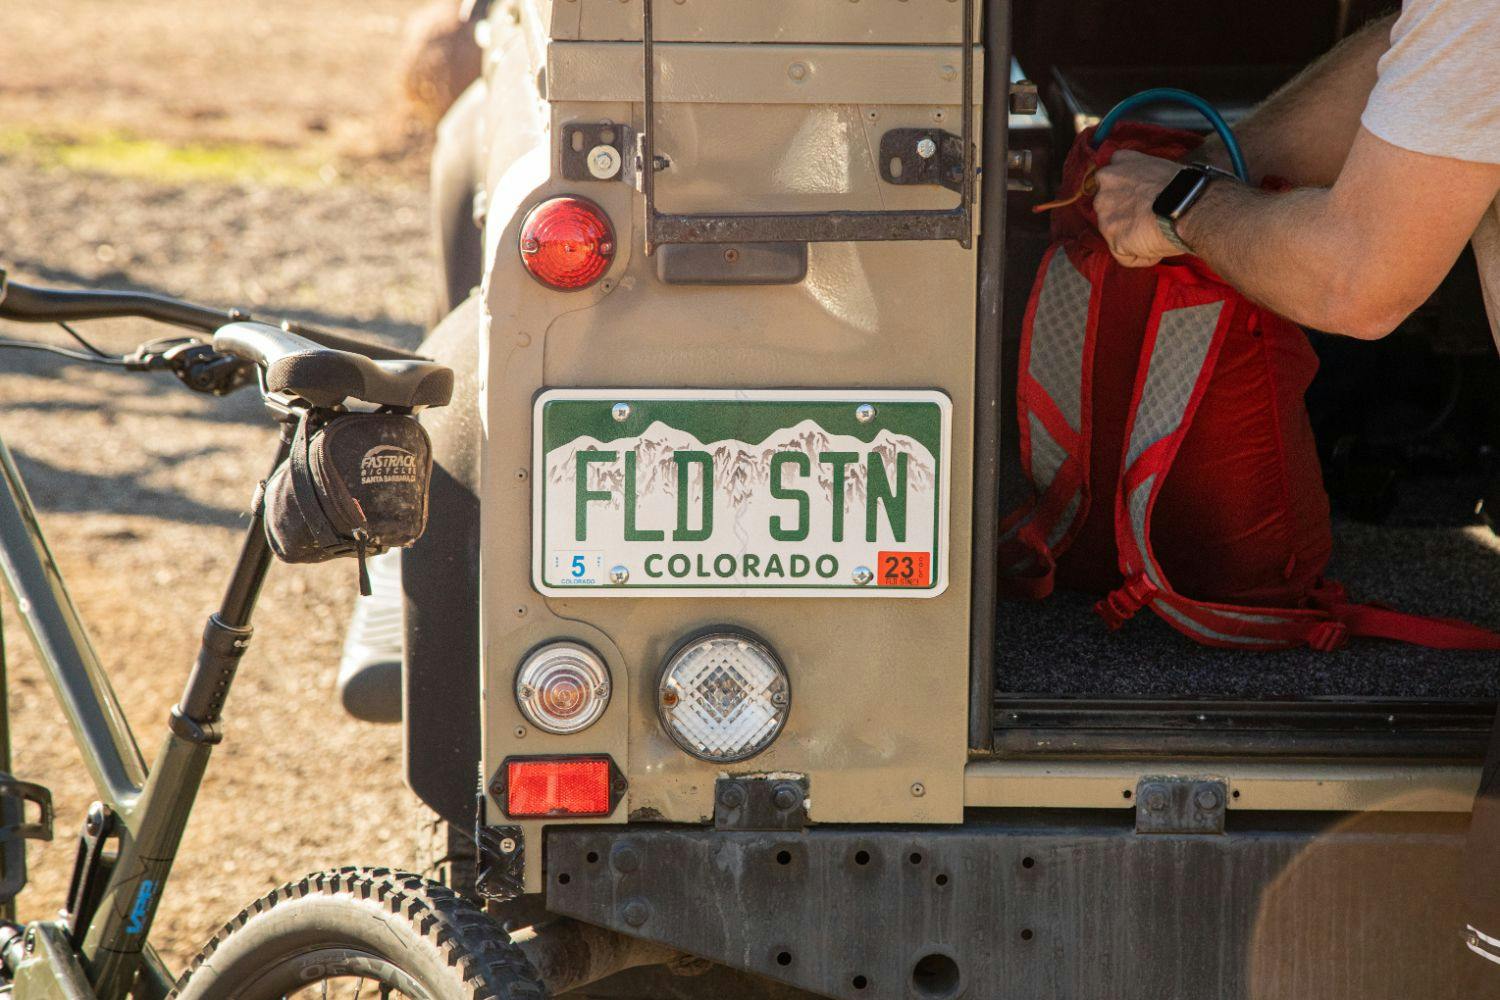 Field Station Colorado license plate on a jeep